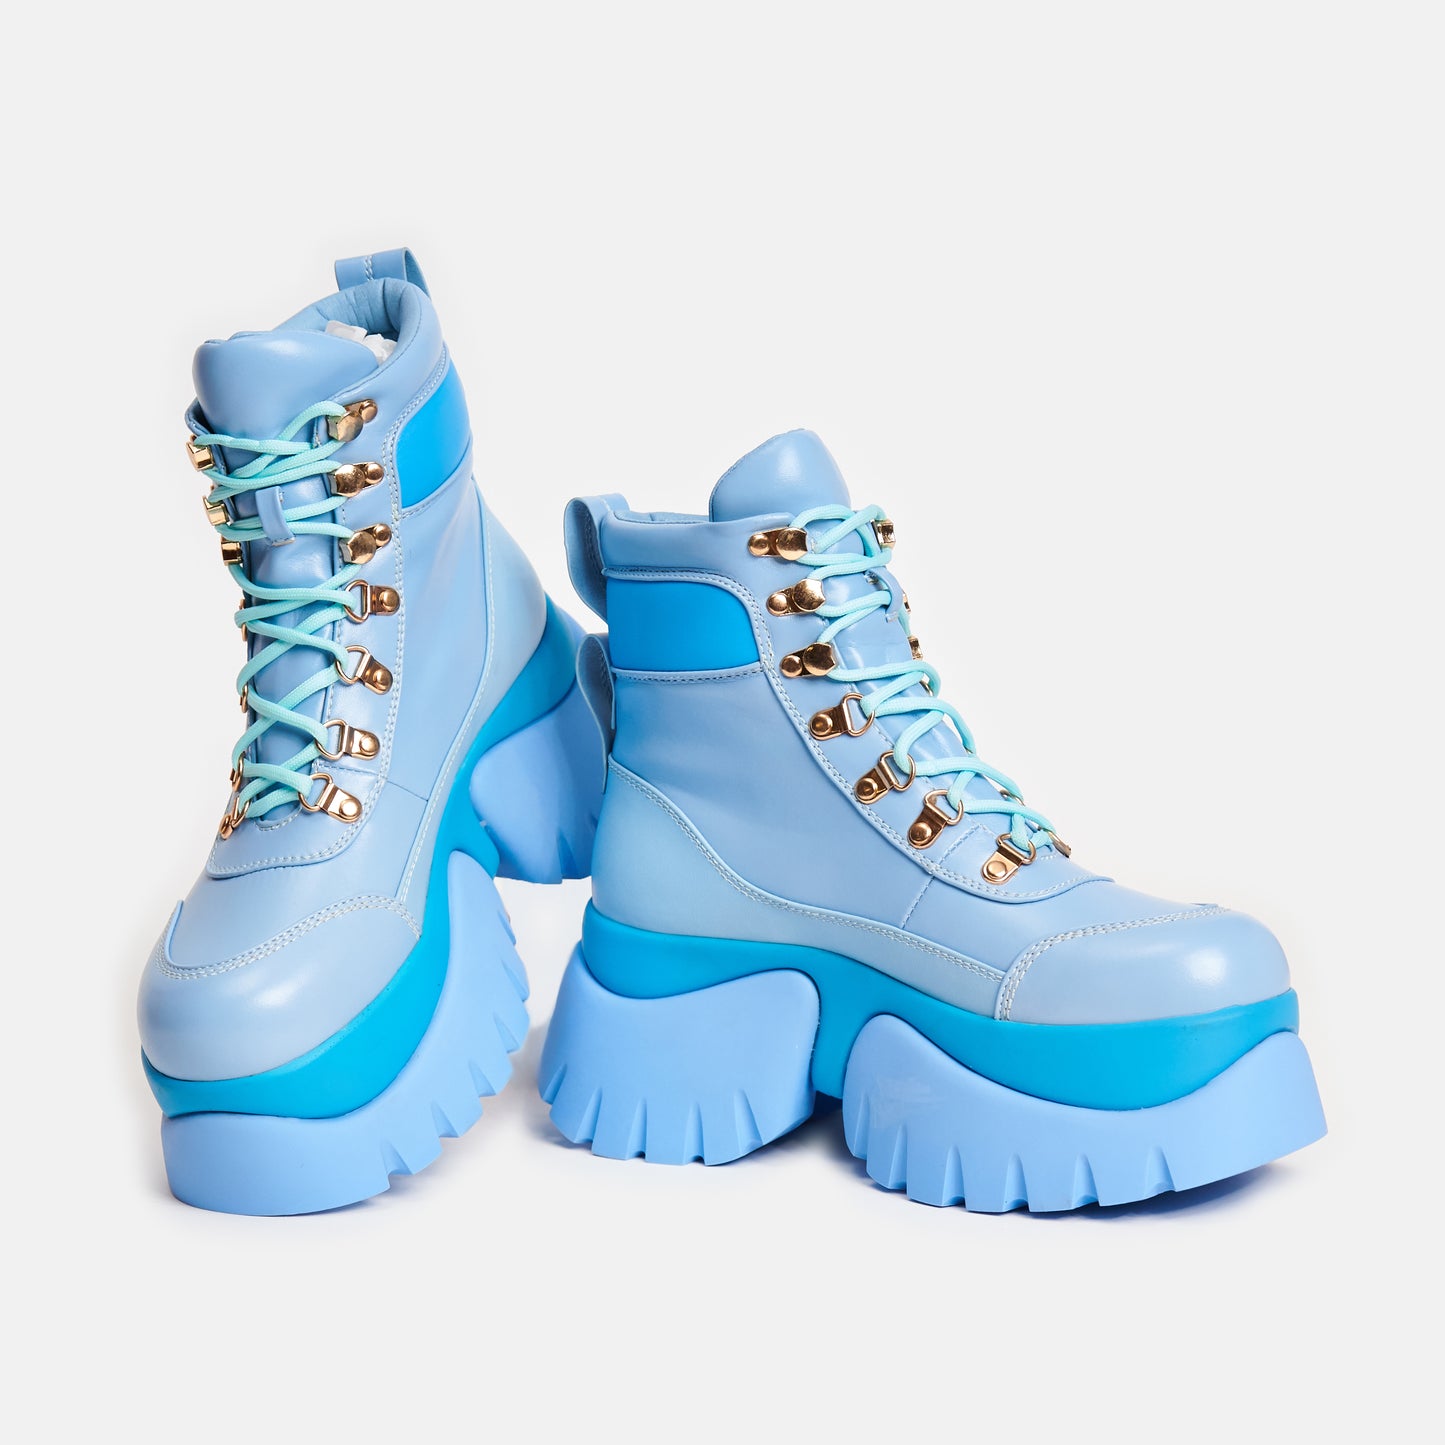 Crybaby Blue Vilun Platform Boots - Ankle Boots - KOI Footwear - Blue - Front and Side View